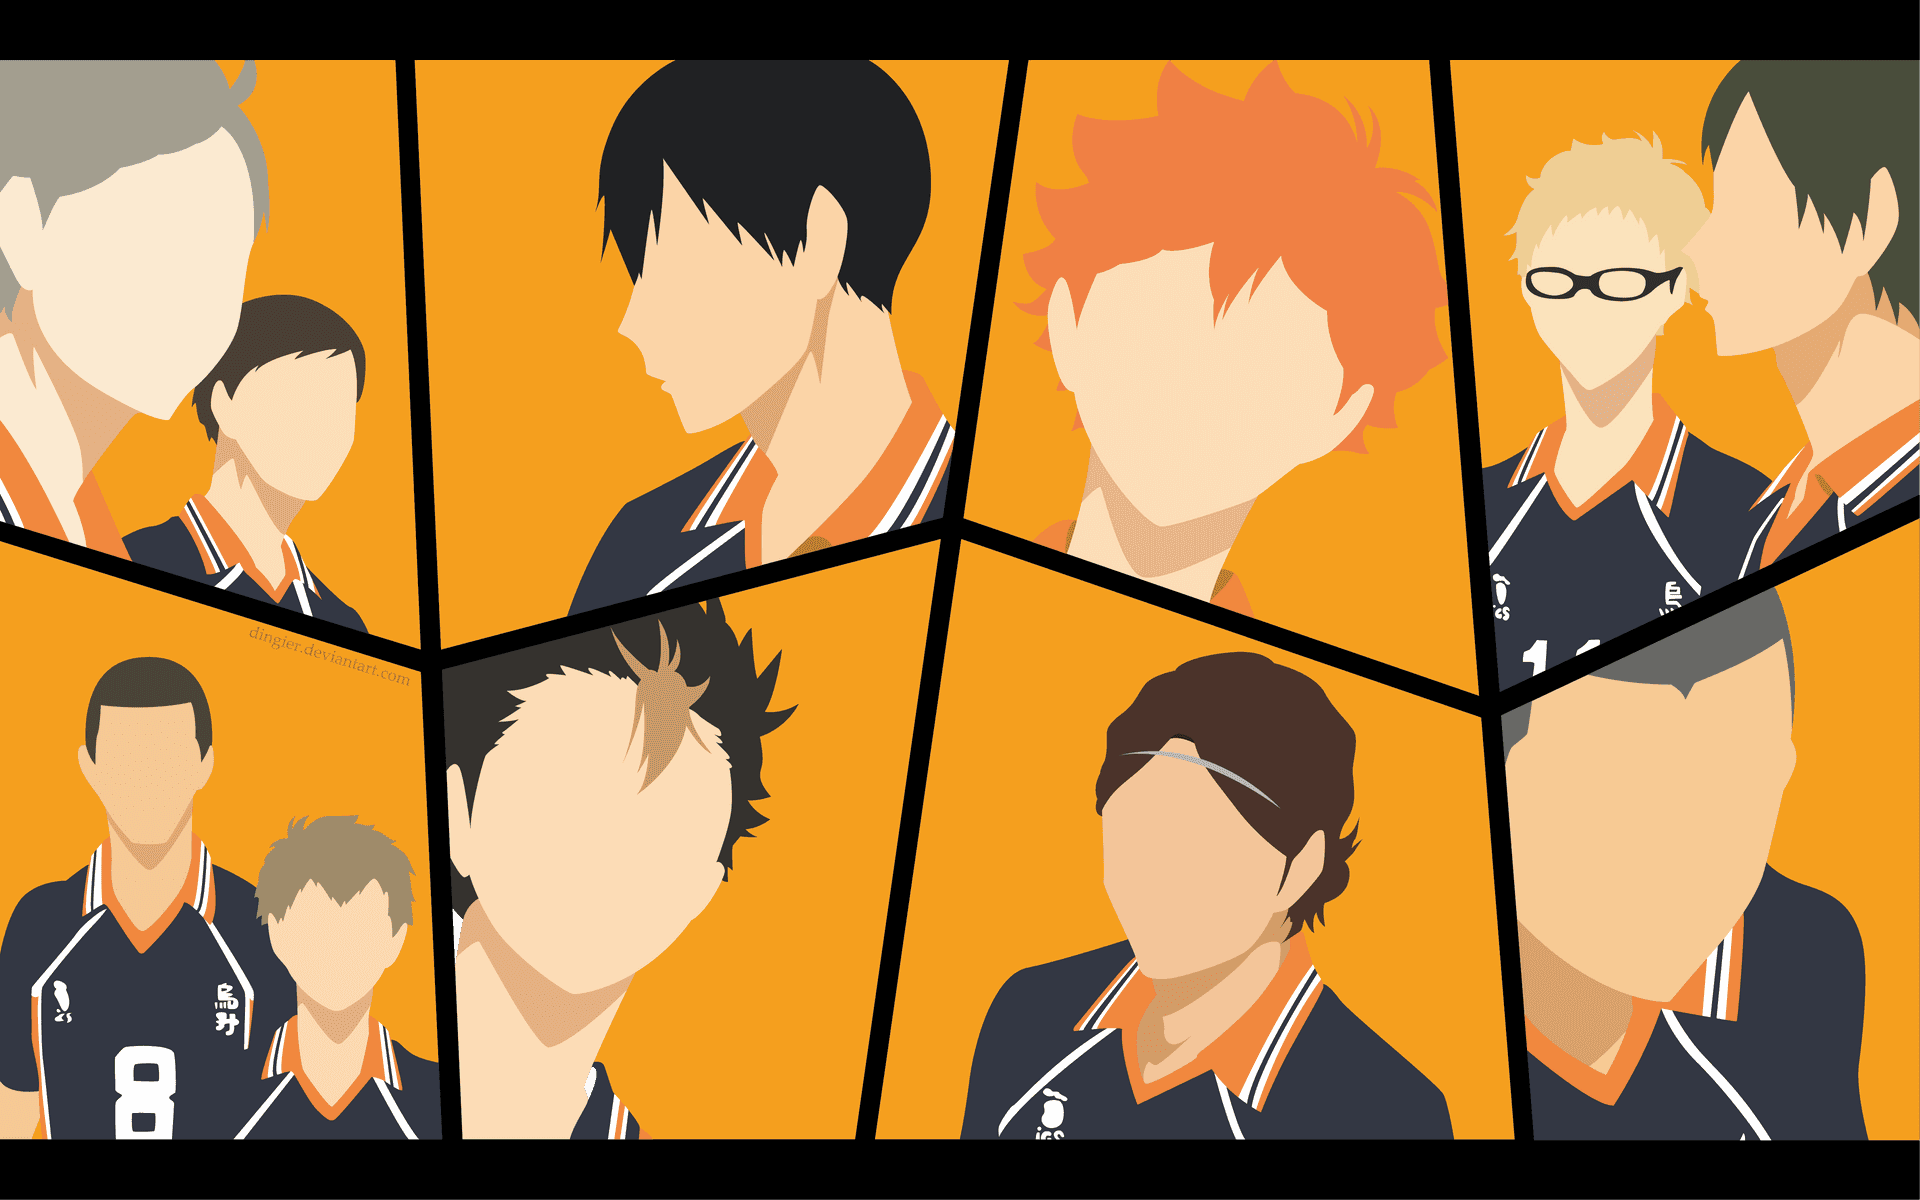 What if pro volleyball players were cast as Haikyuu characters?